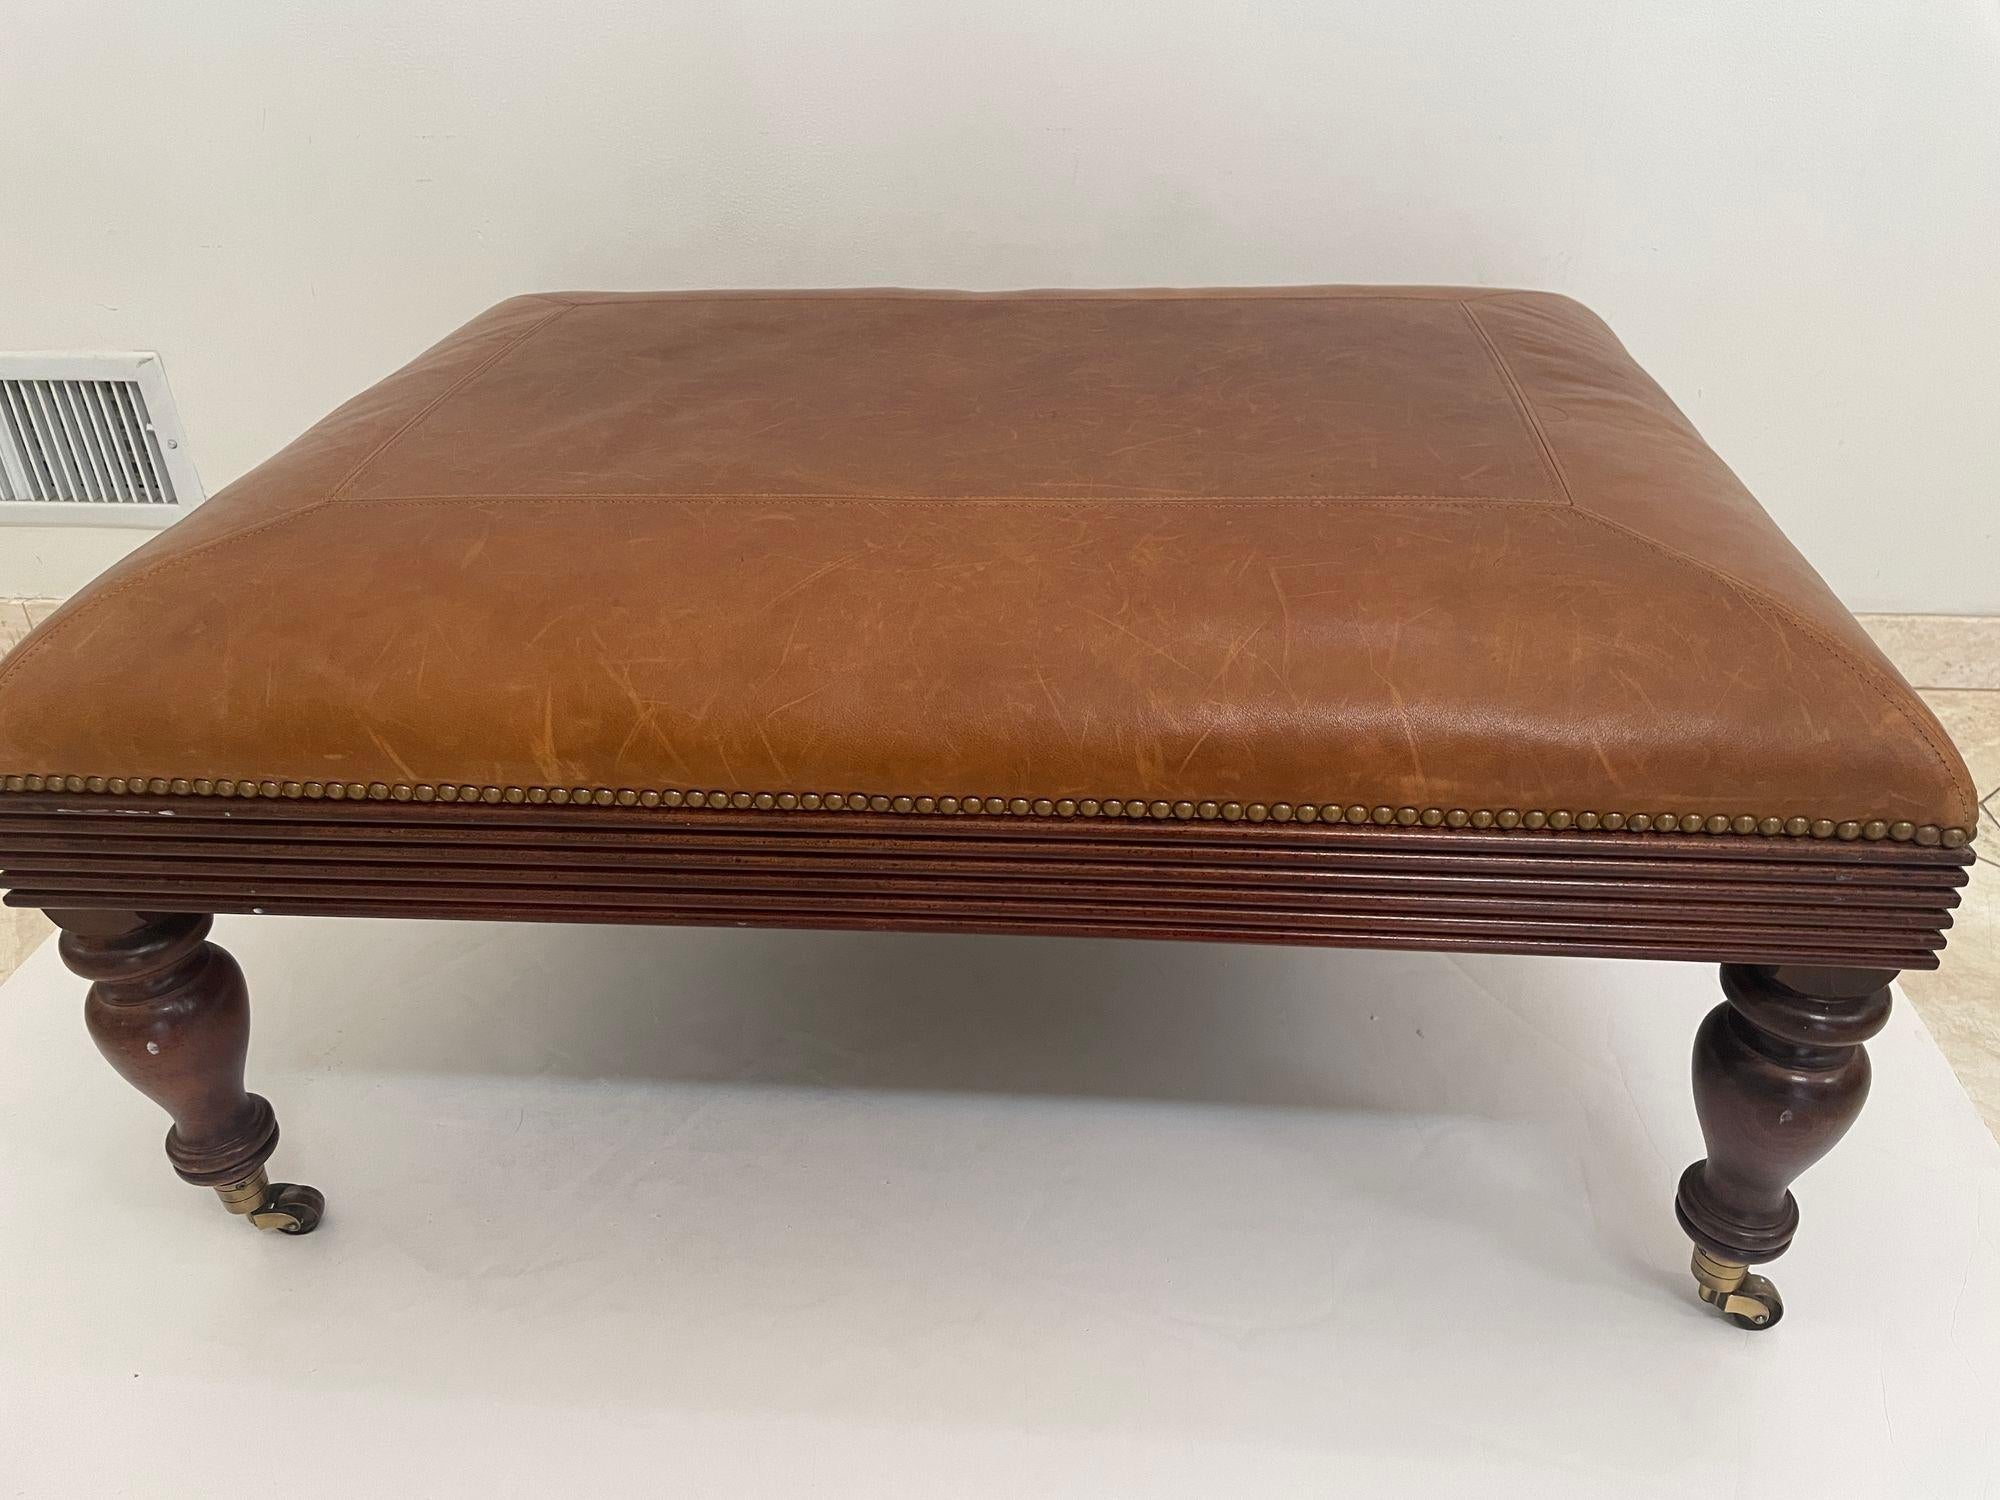 Victorian English Style leather Ottoman with Brass Casters and Nailhead Trim For Sale 9